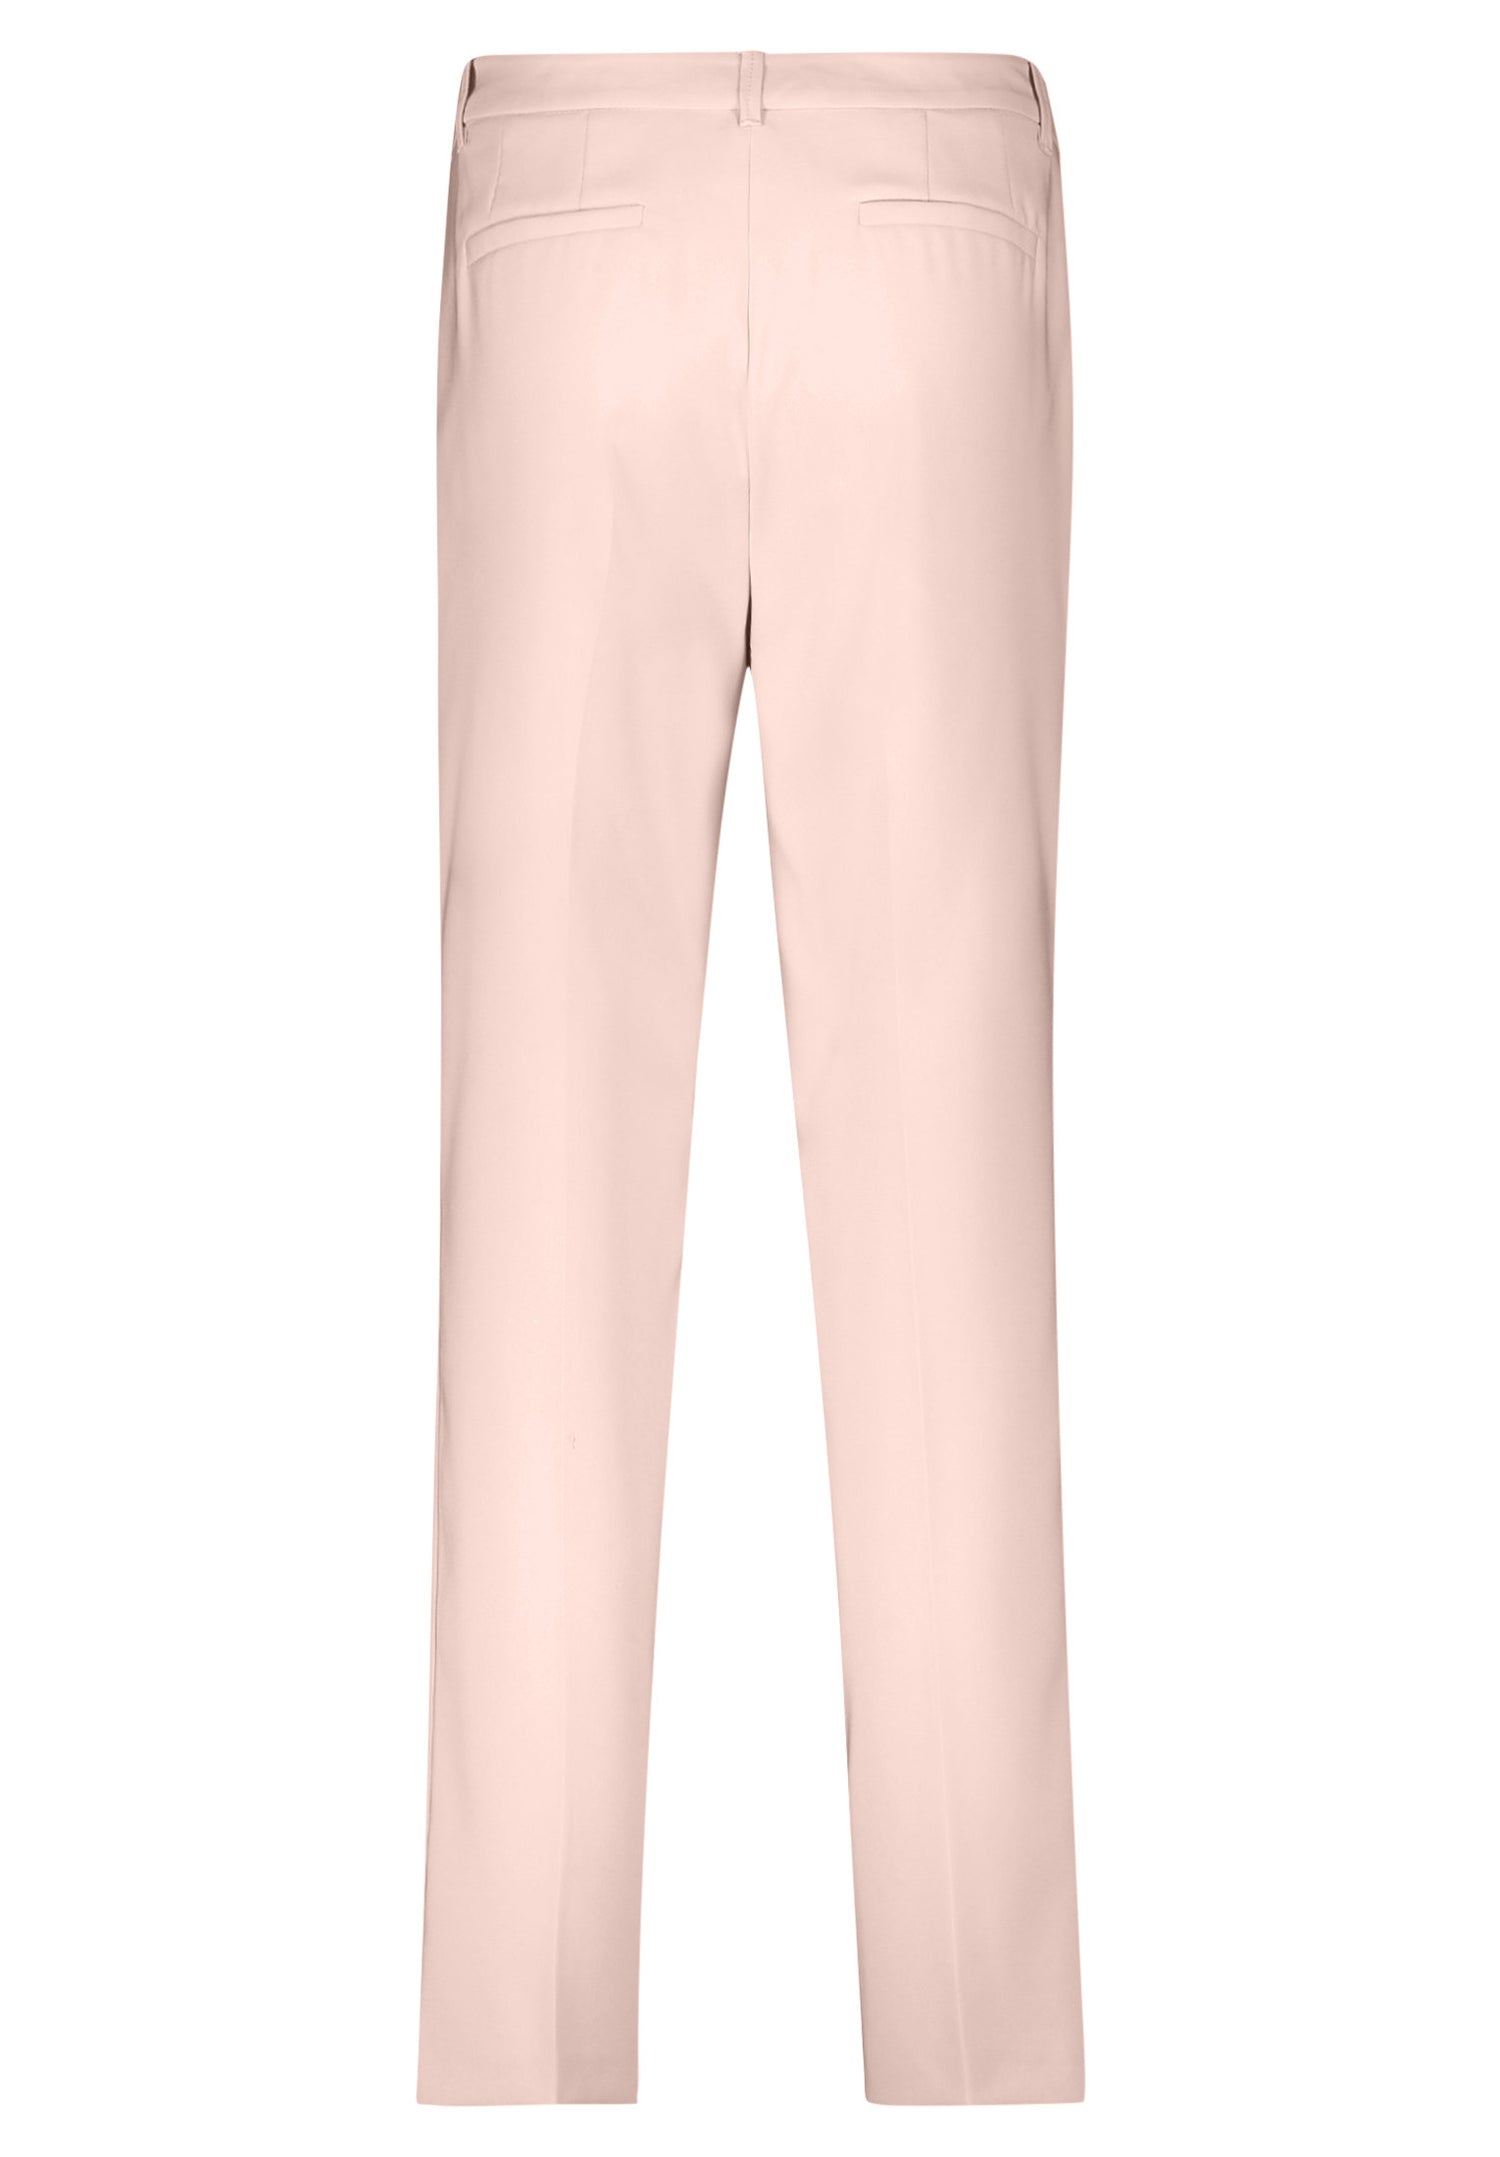 Business Trousers
With Crease_6002-1080_6055_03